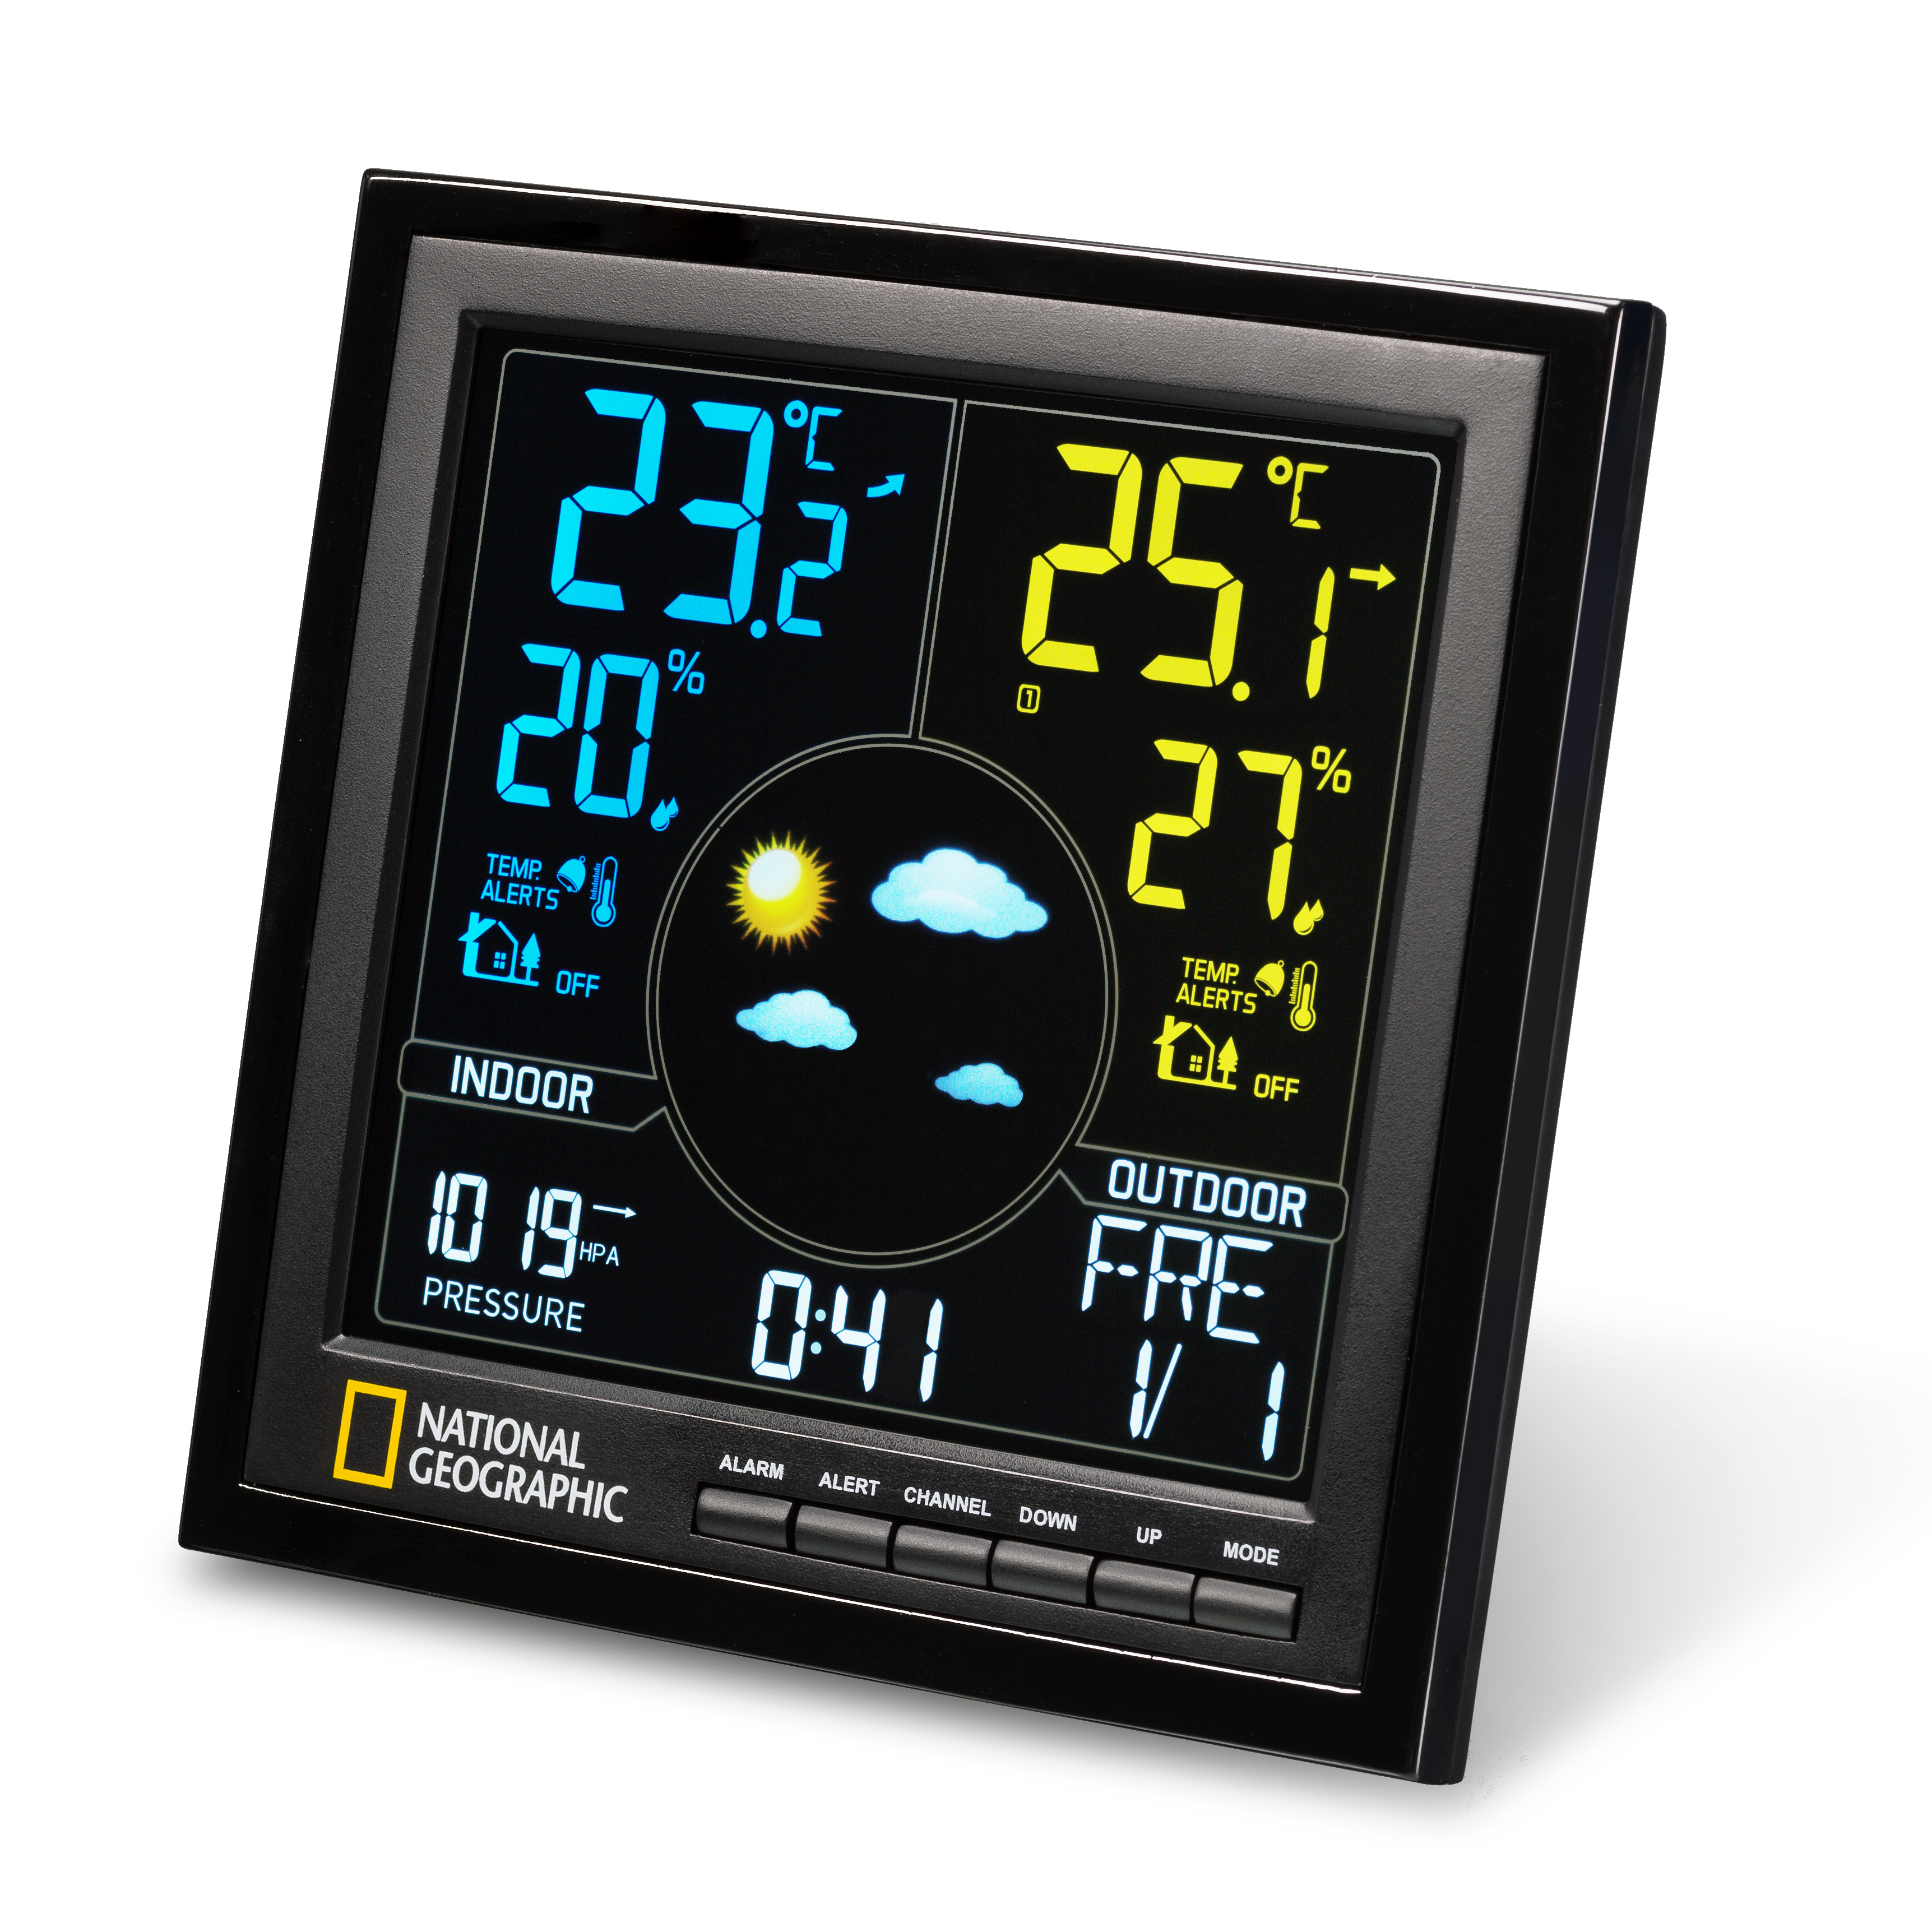 NATIONAL GEOGRAPHIC VA colour RC Weather Station (Refurbished)